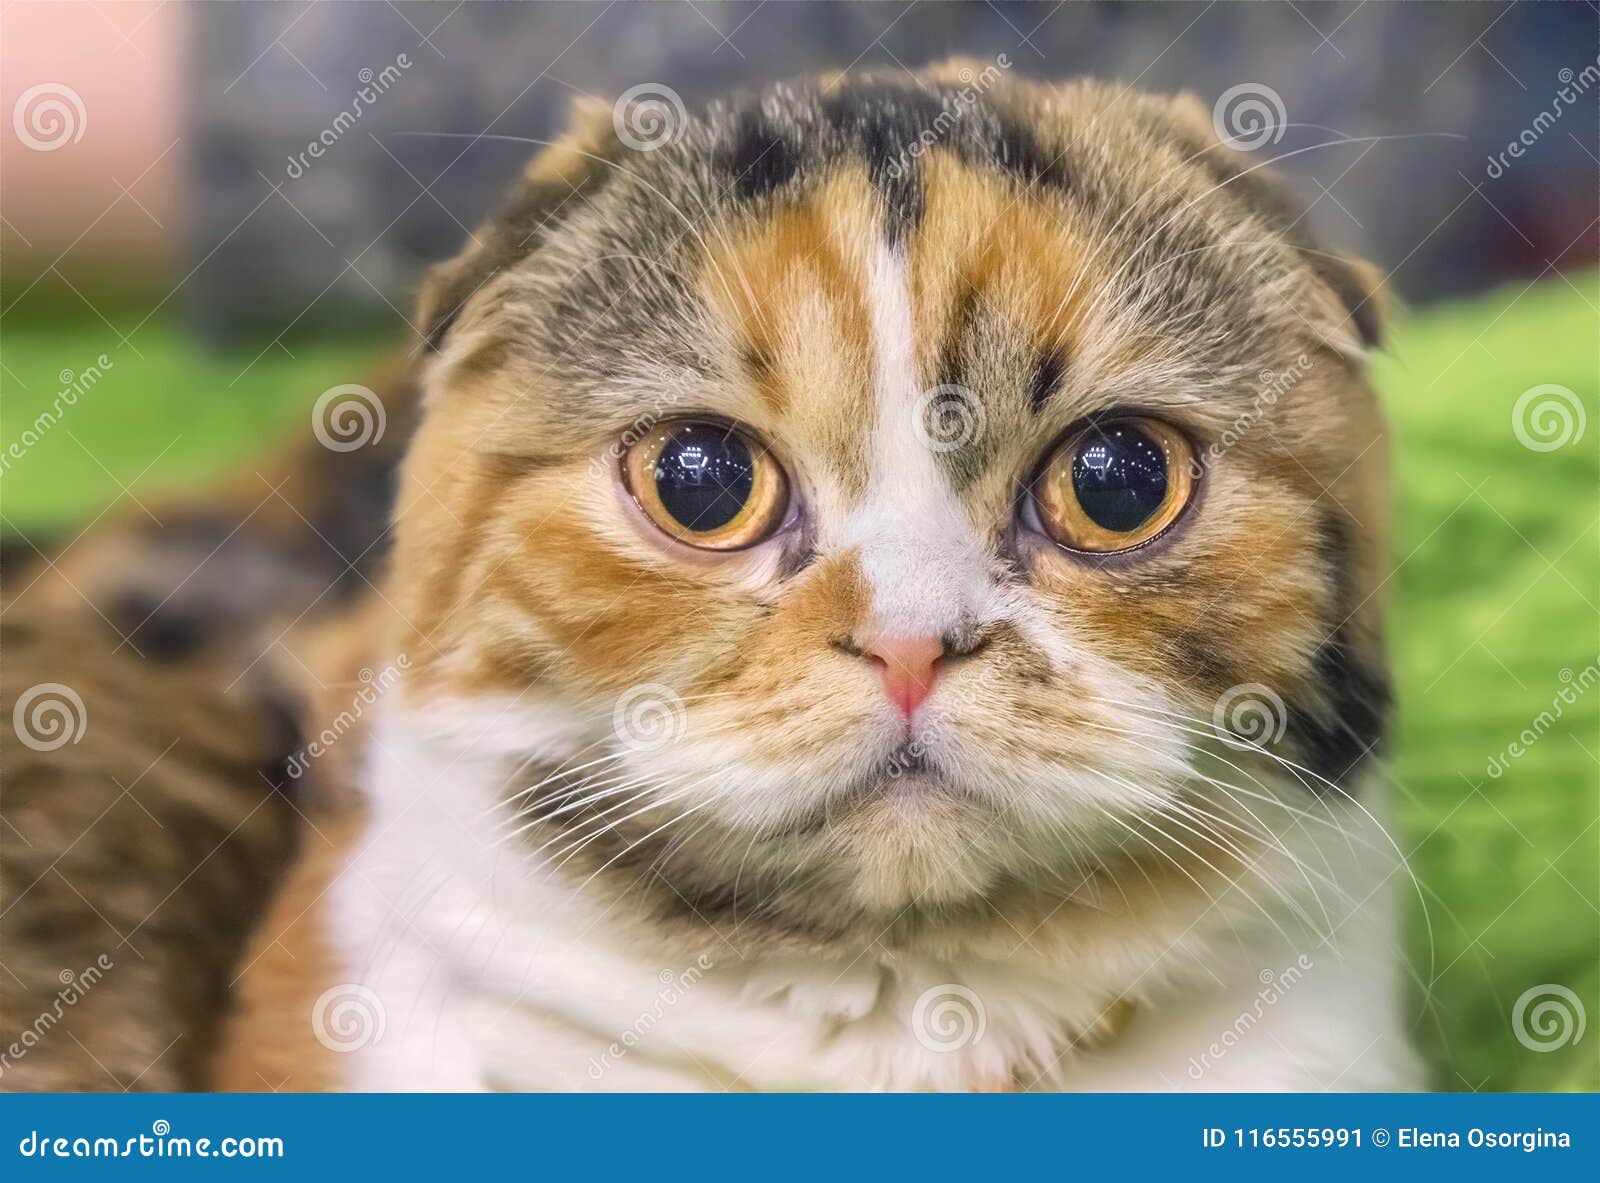 Charming Kitten Of The Breed Highland Fold. Stock Image ...